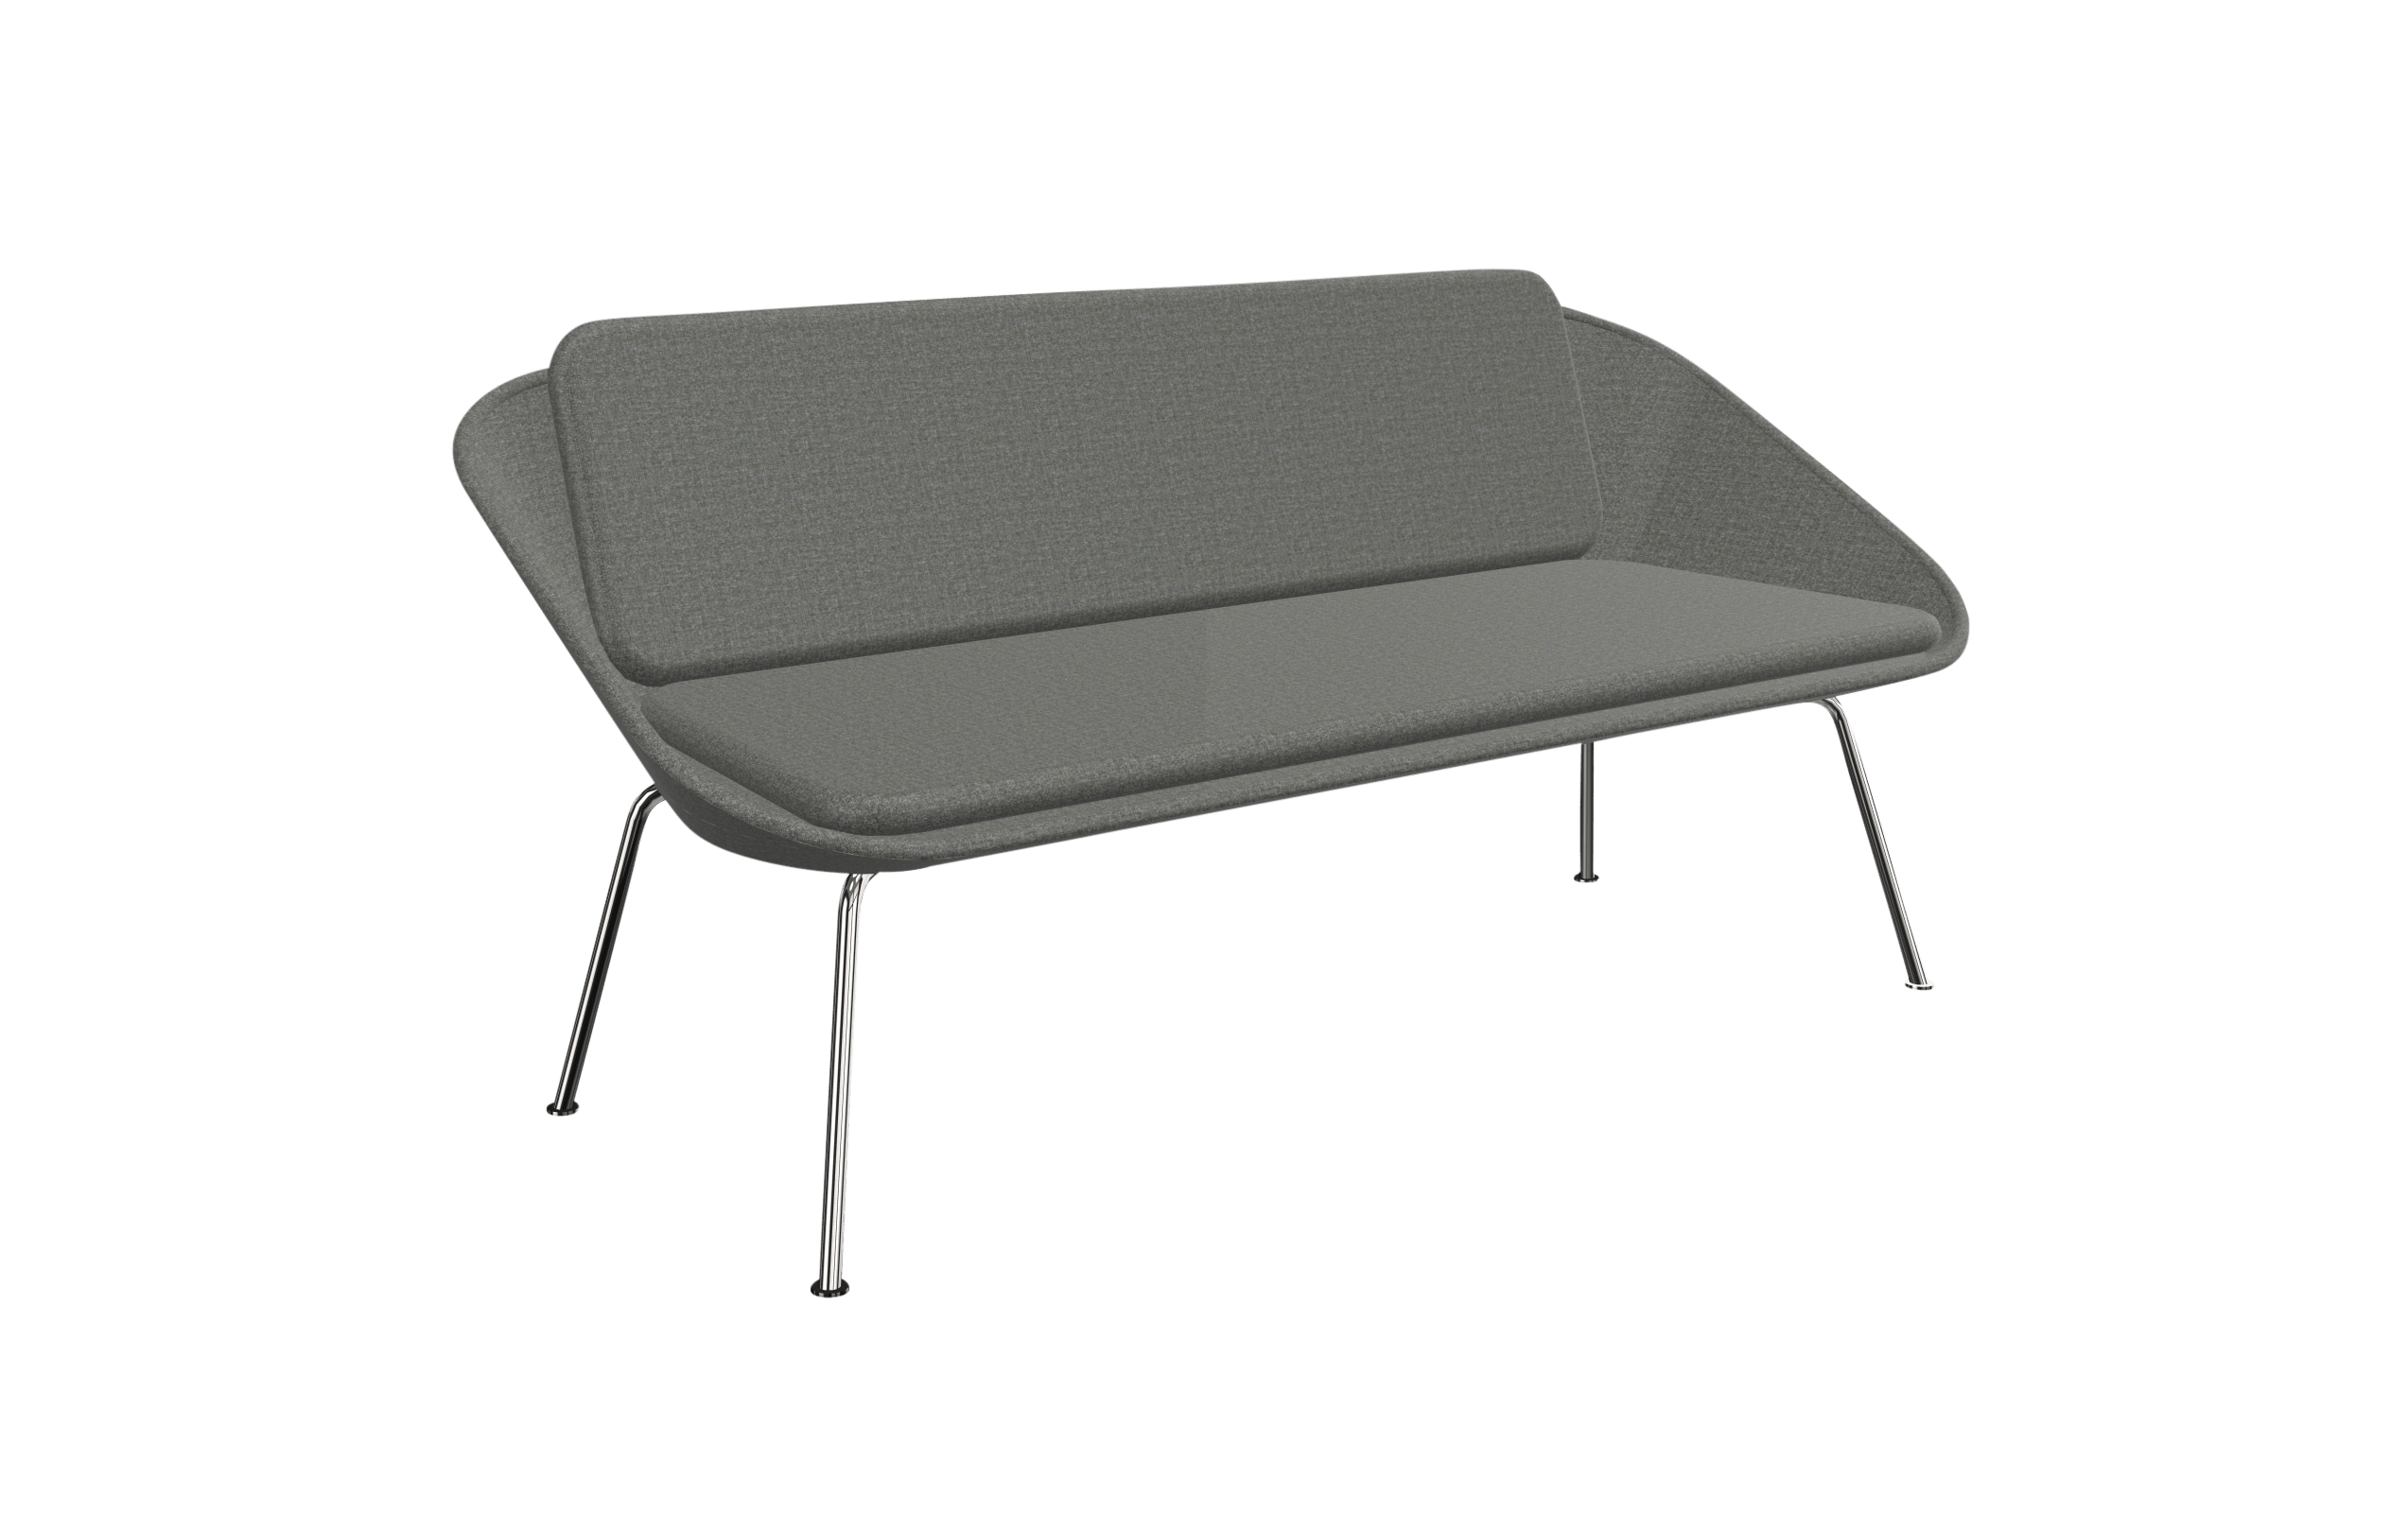 A grey sofa with metal legs